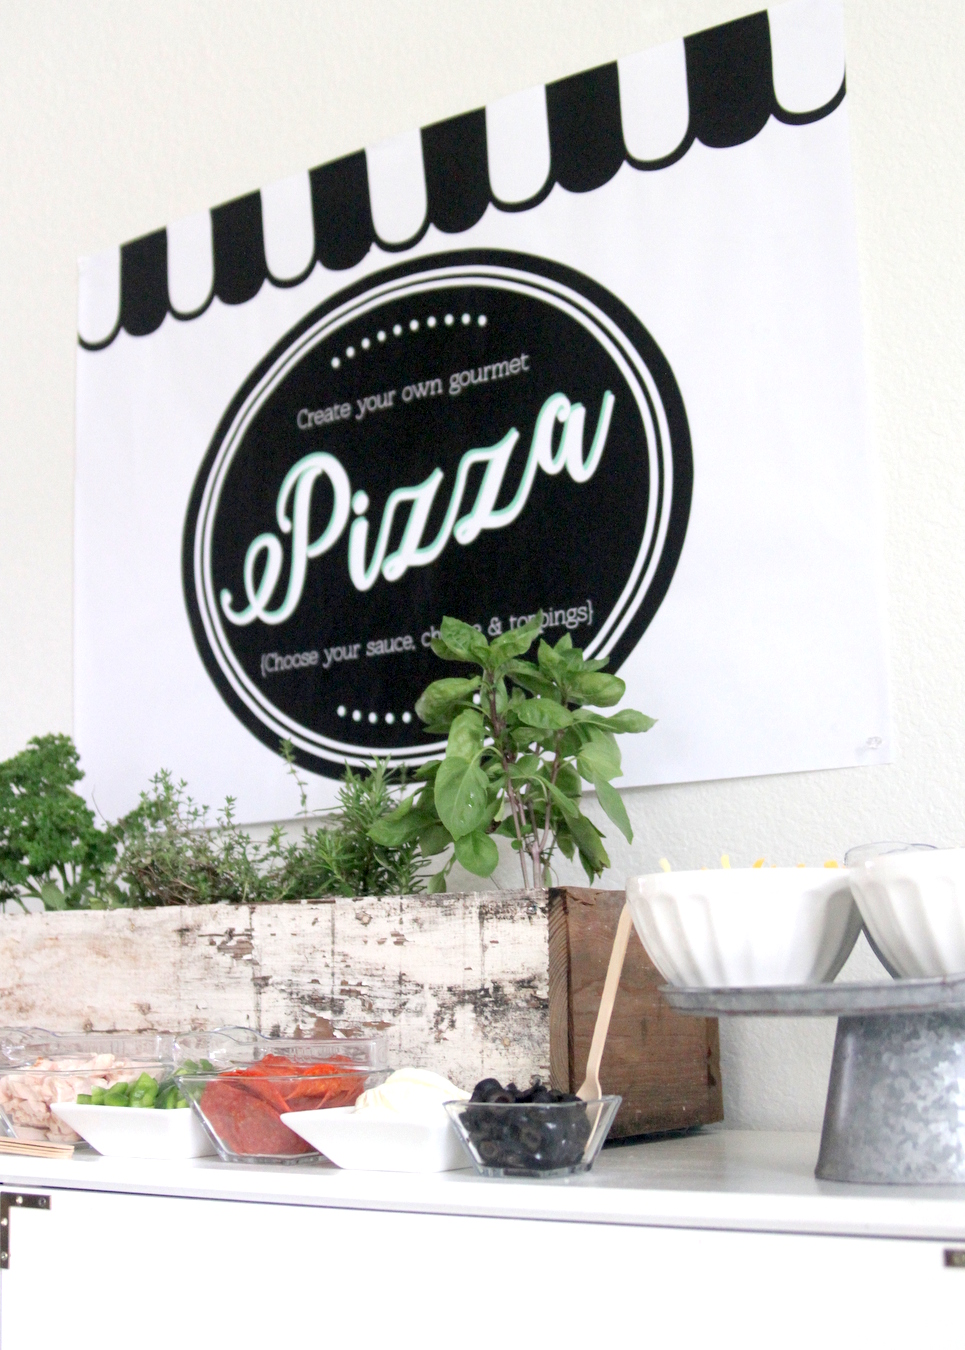 pizza party- make your own pizza station